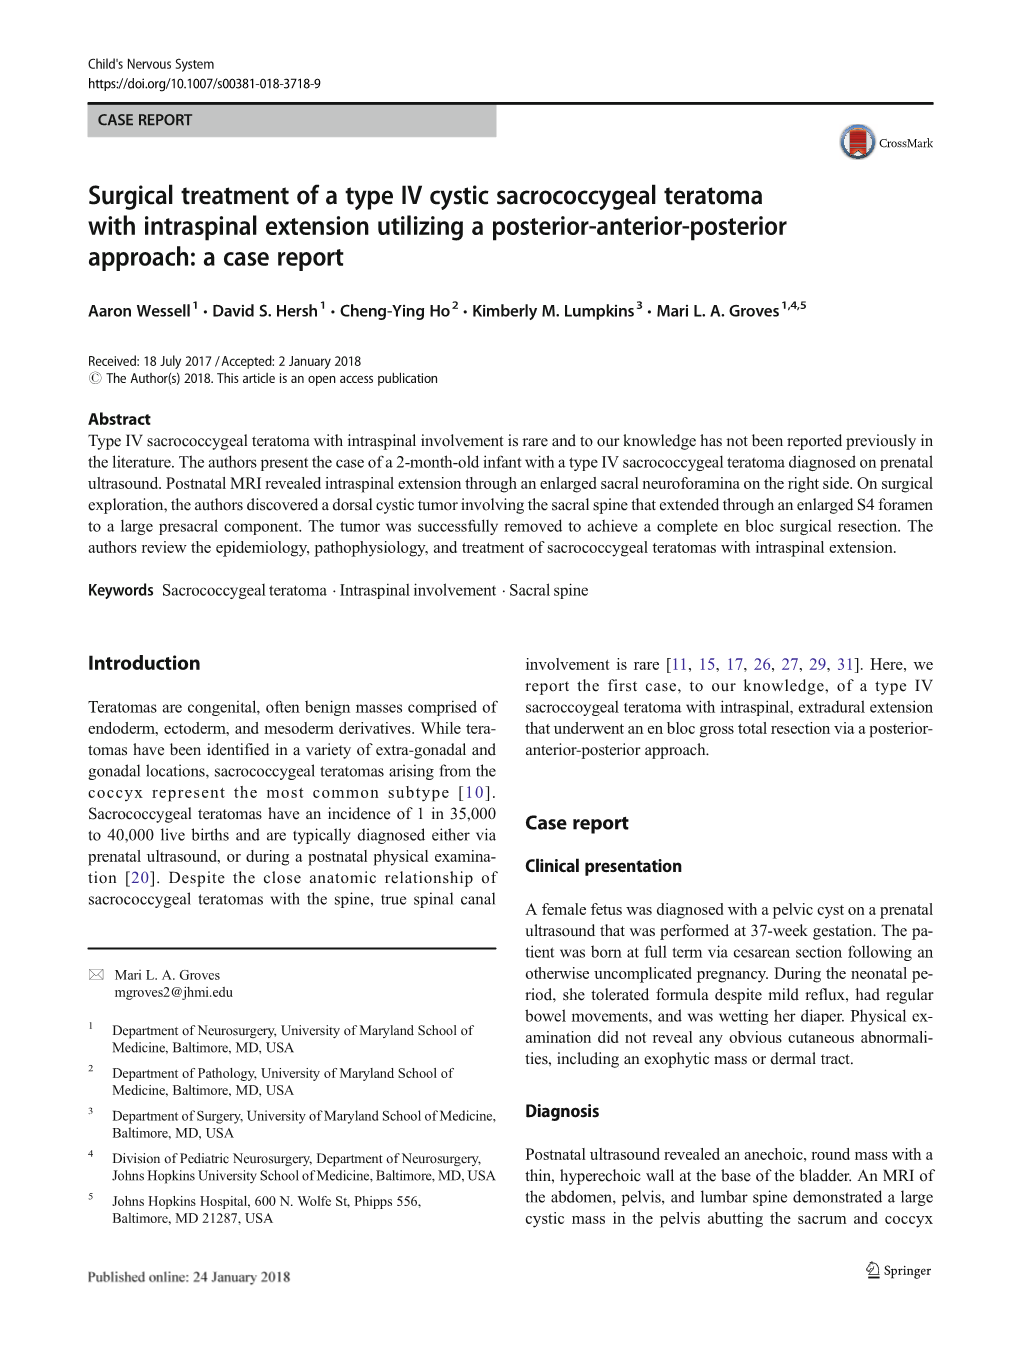 Surgical Treatment of a Type IV Cystic Sacrococcygeal Teratoma with Intraspinal Extension Utilizing a Posterior-Anterior-Posterior Approach: a Case Report